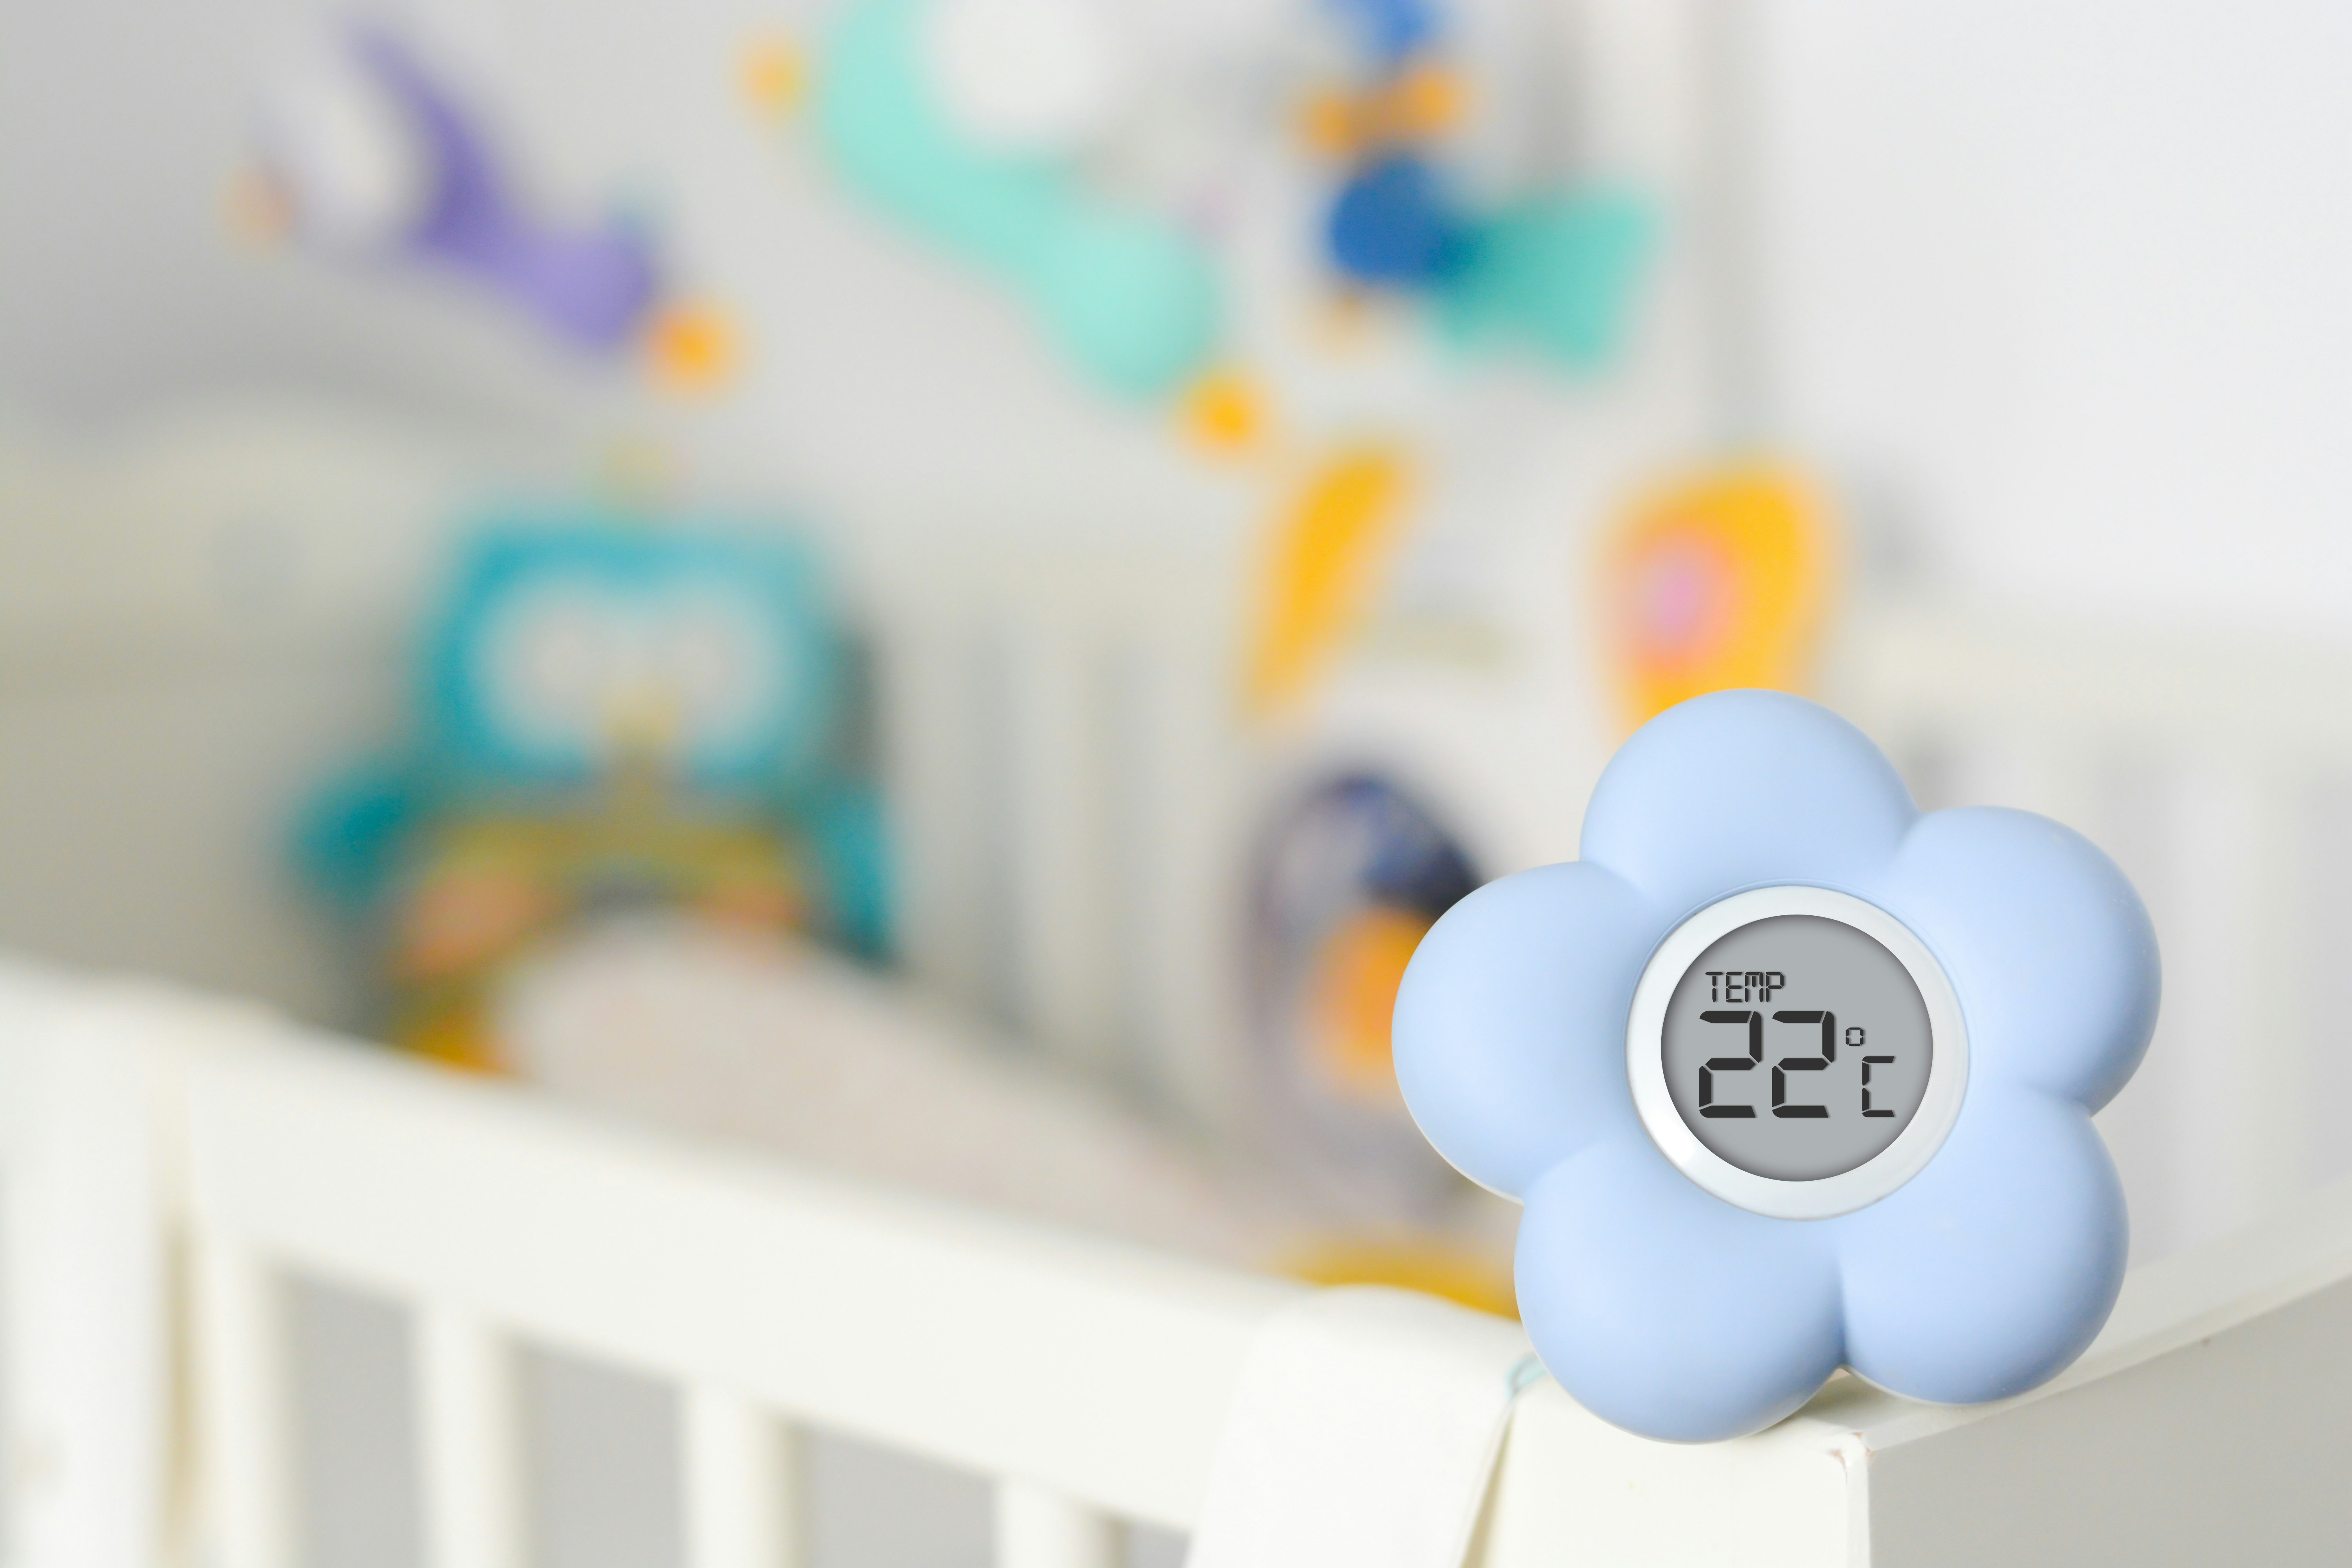 https://images.bauerhosting.com/affiliates/sites/12/motherandbaby/legacy/root/baby-room-thermometer.jpg?ar=16%3A9&fit=crop&crop=top&auto=format&w=undefined&q=80